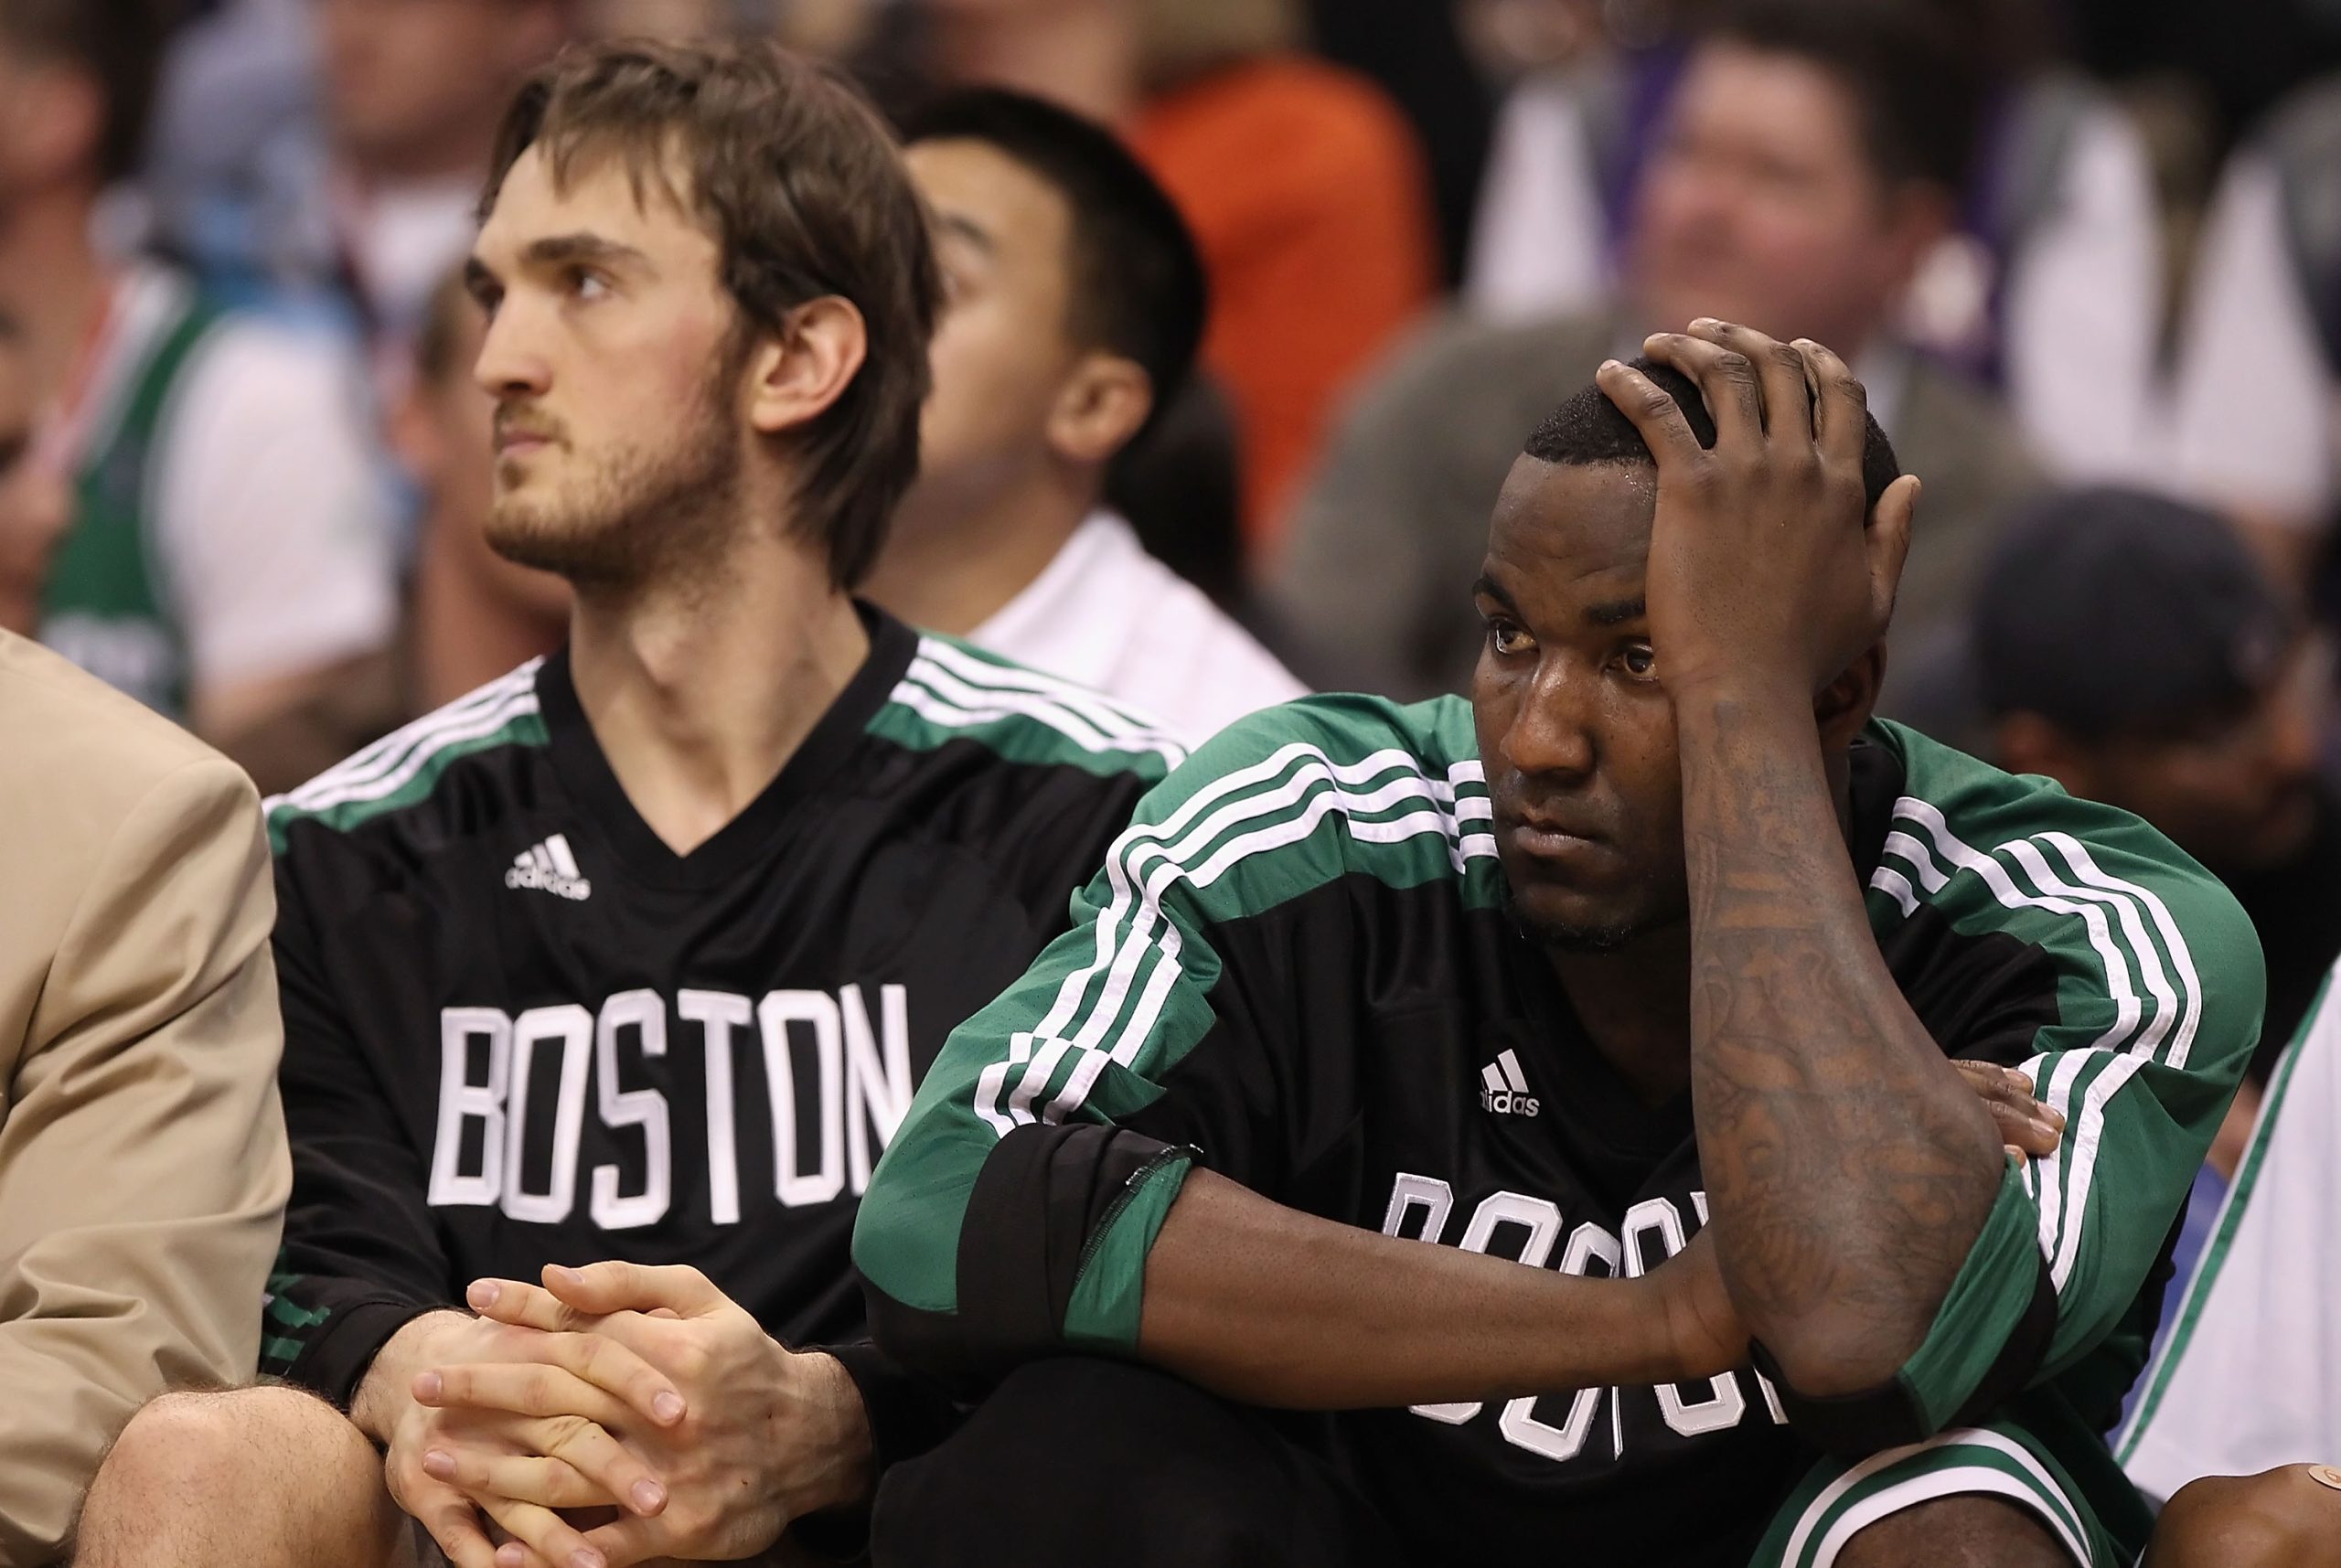 Kendrick Perkins, right, of the Boston Celtics reacts while sitting on the bench.